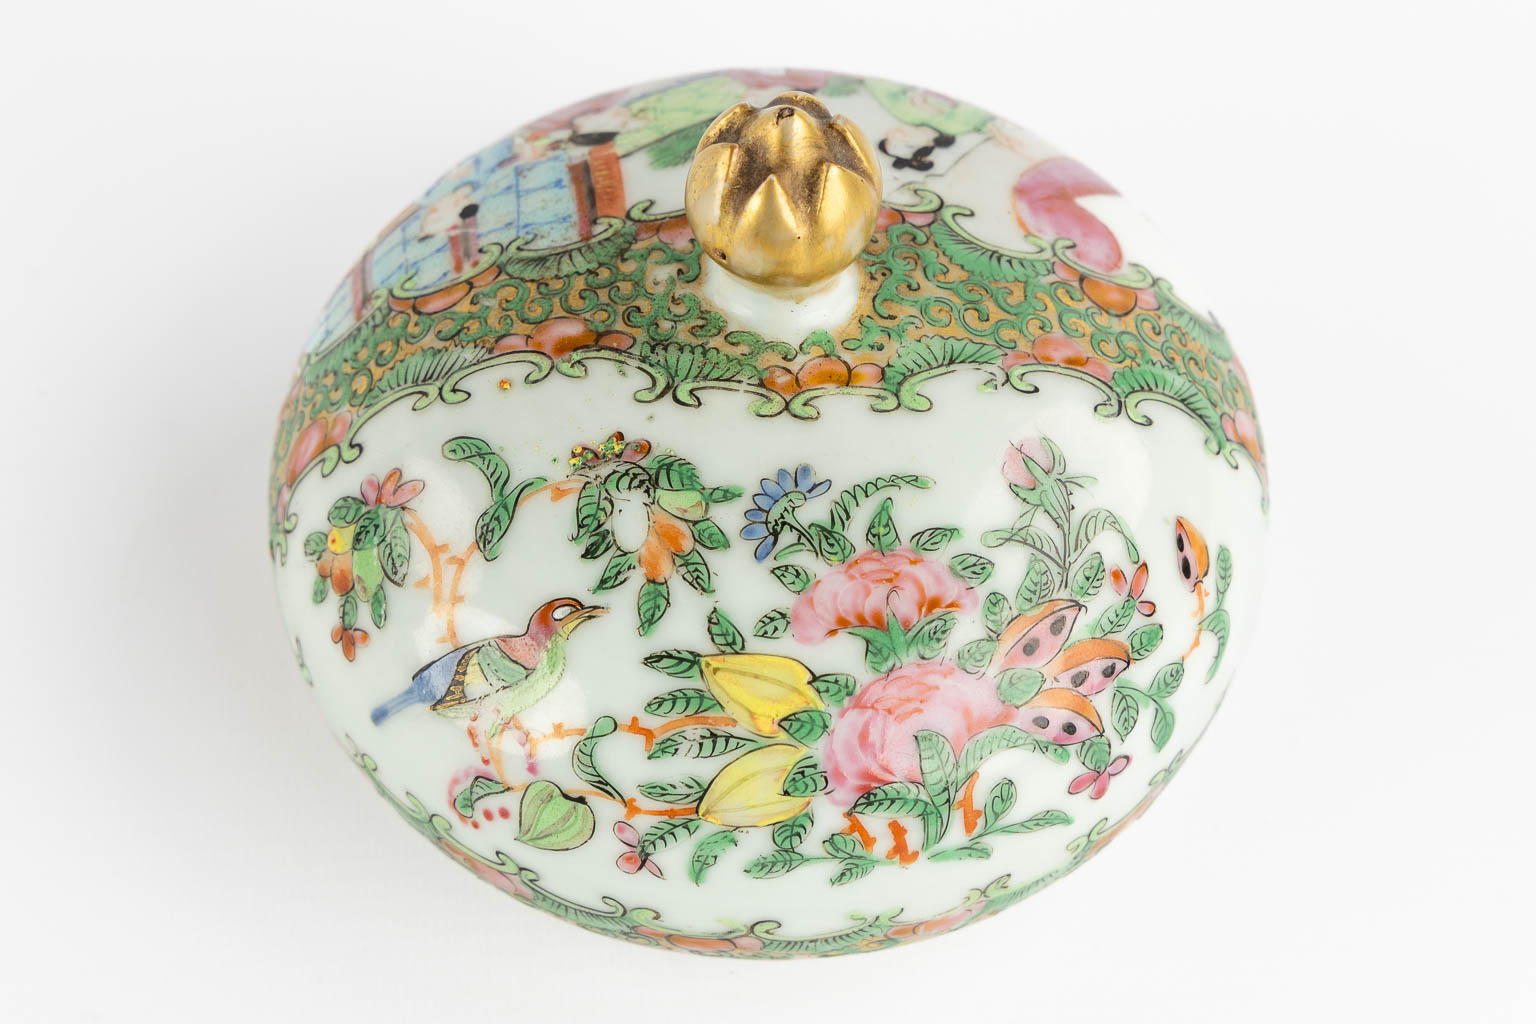 A Chinese Canton vase with a lid, interior scnes with figurines, fauna and flora. 19th/20th C. (H:4 - Image 13 of 19